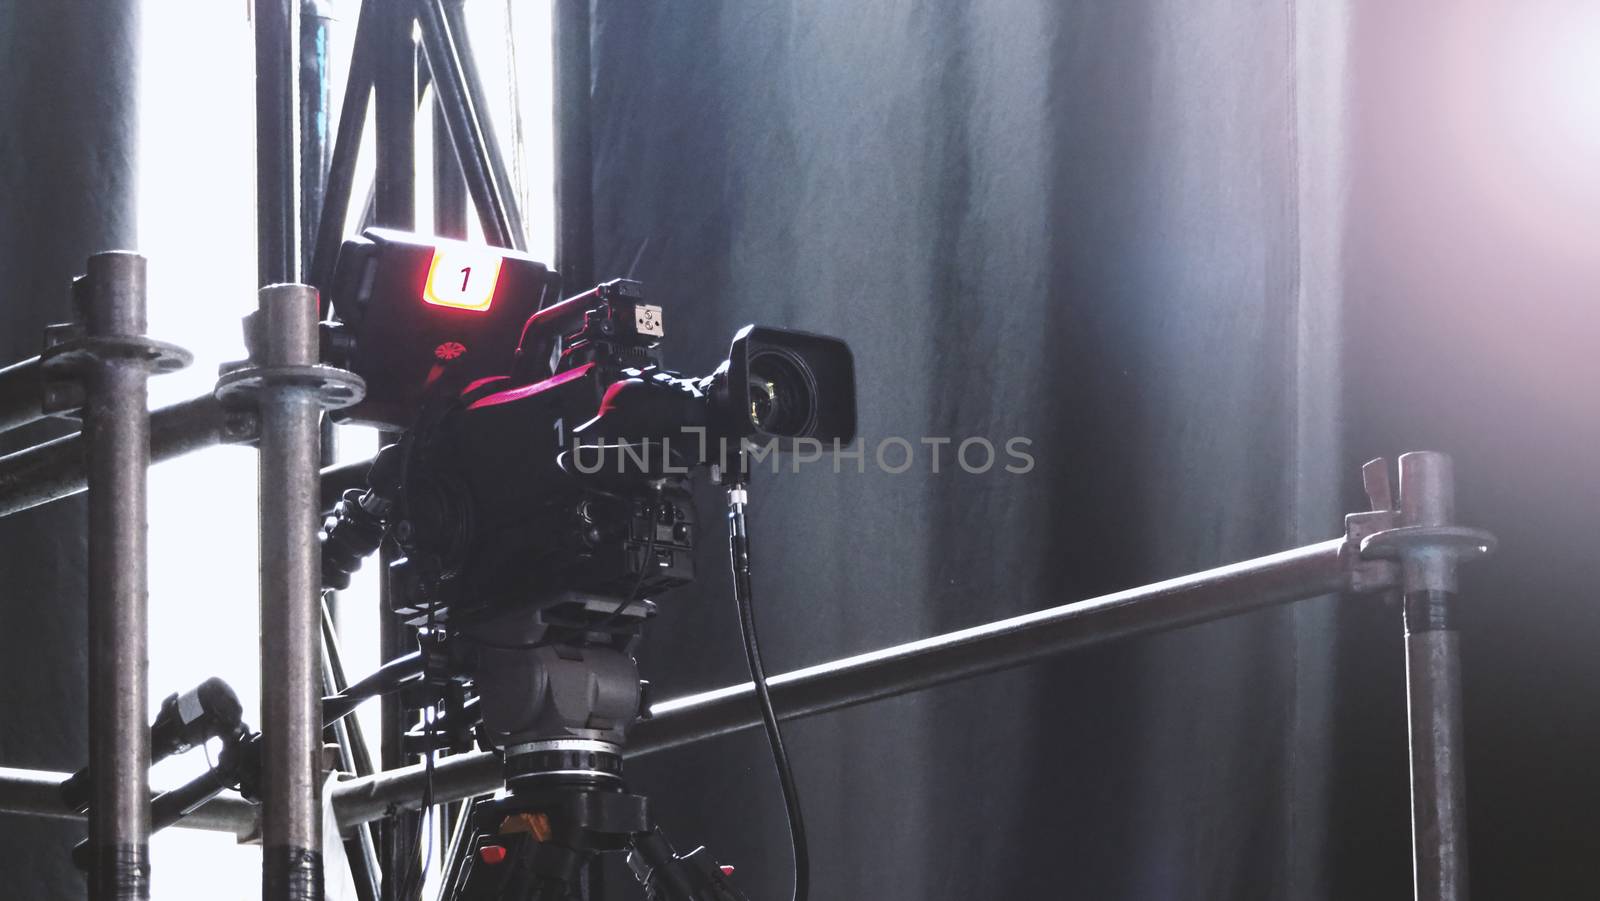 Blurry images of broadcast camera on the crane by gnepphoto